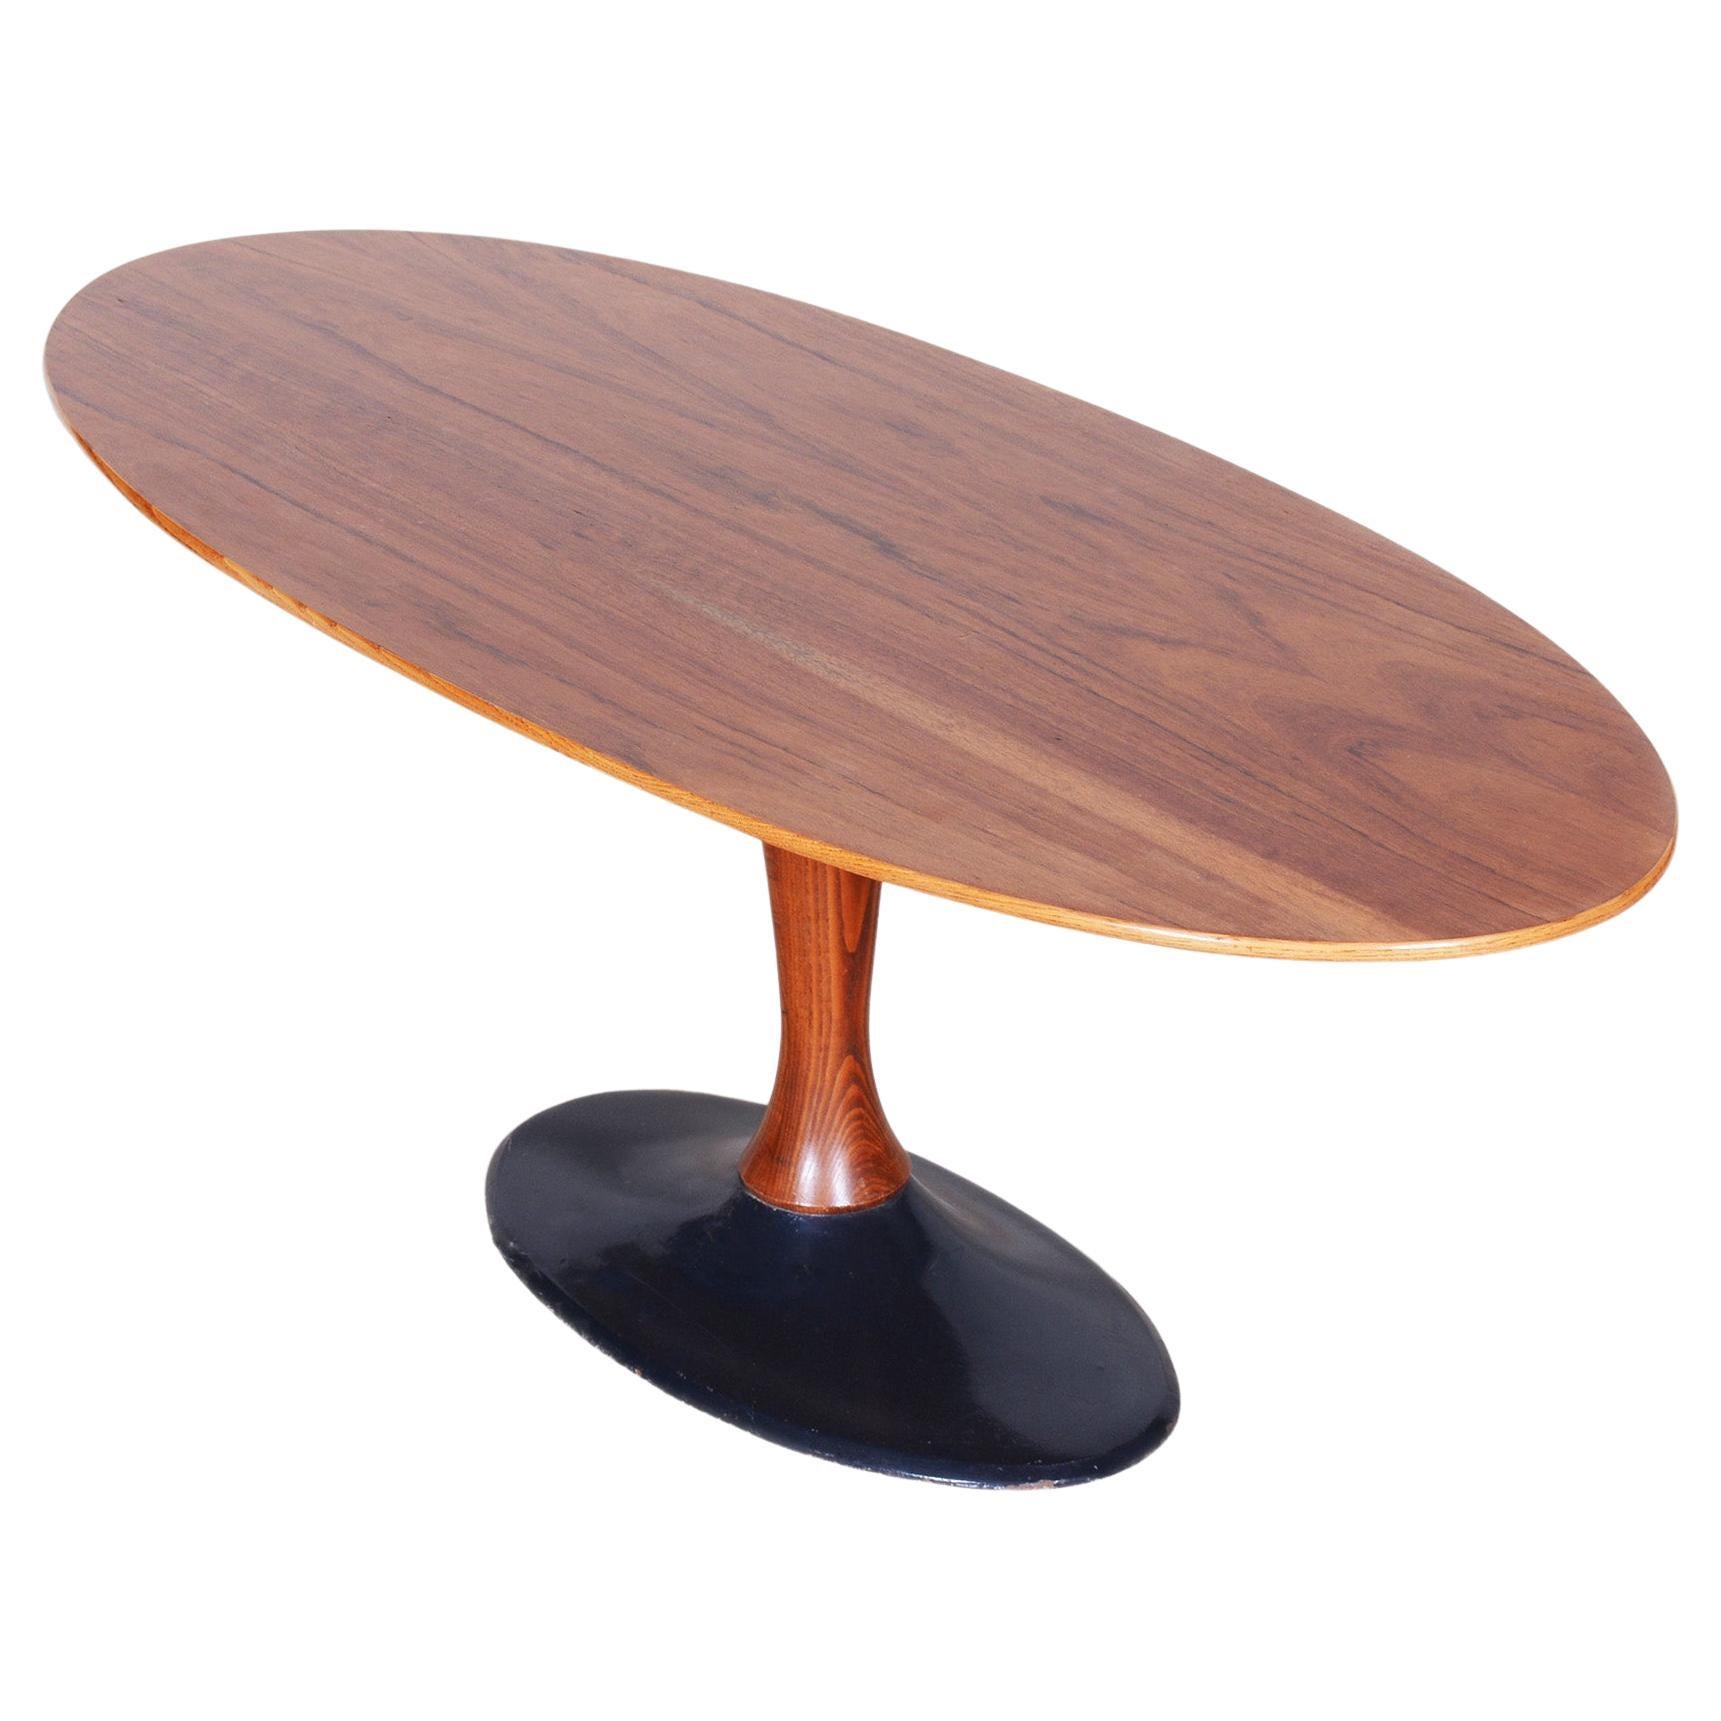 Czech Mid-Century Rosewood Oval Table with Cast Iron Base, 1950s